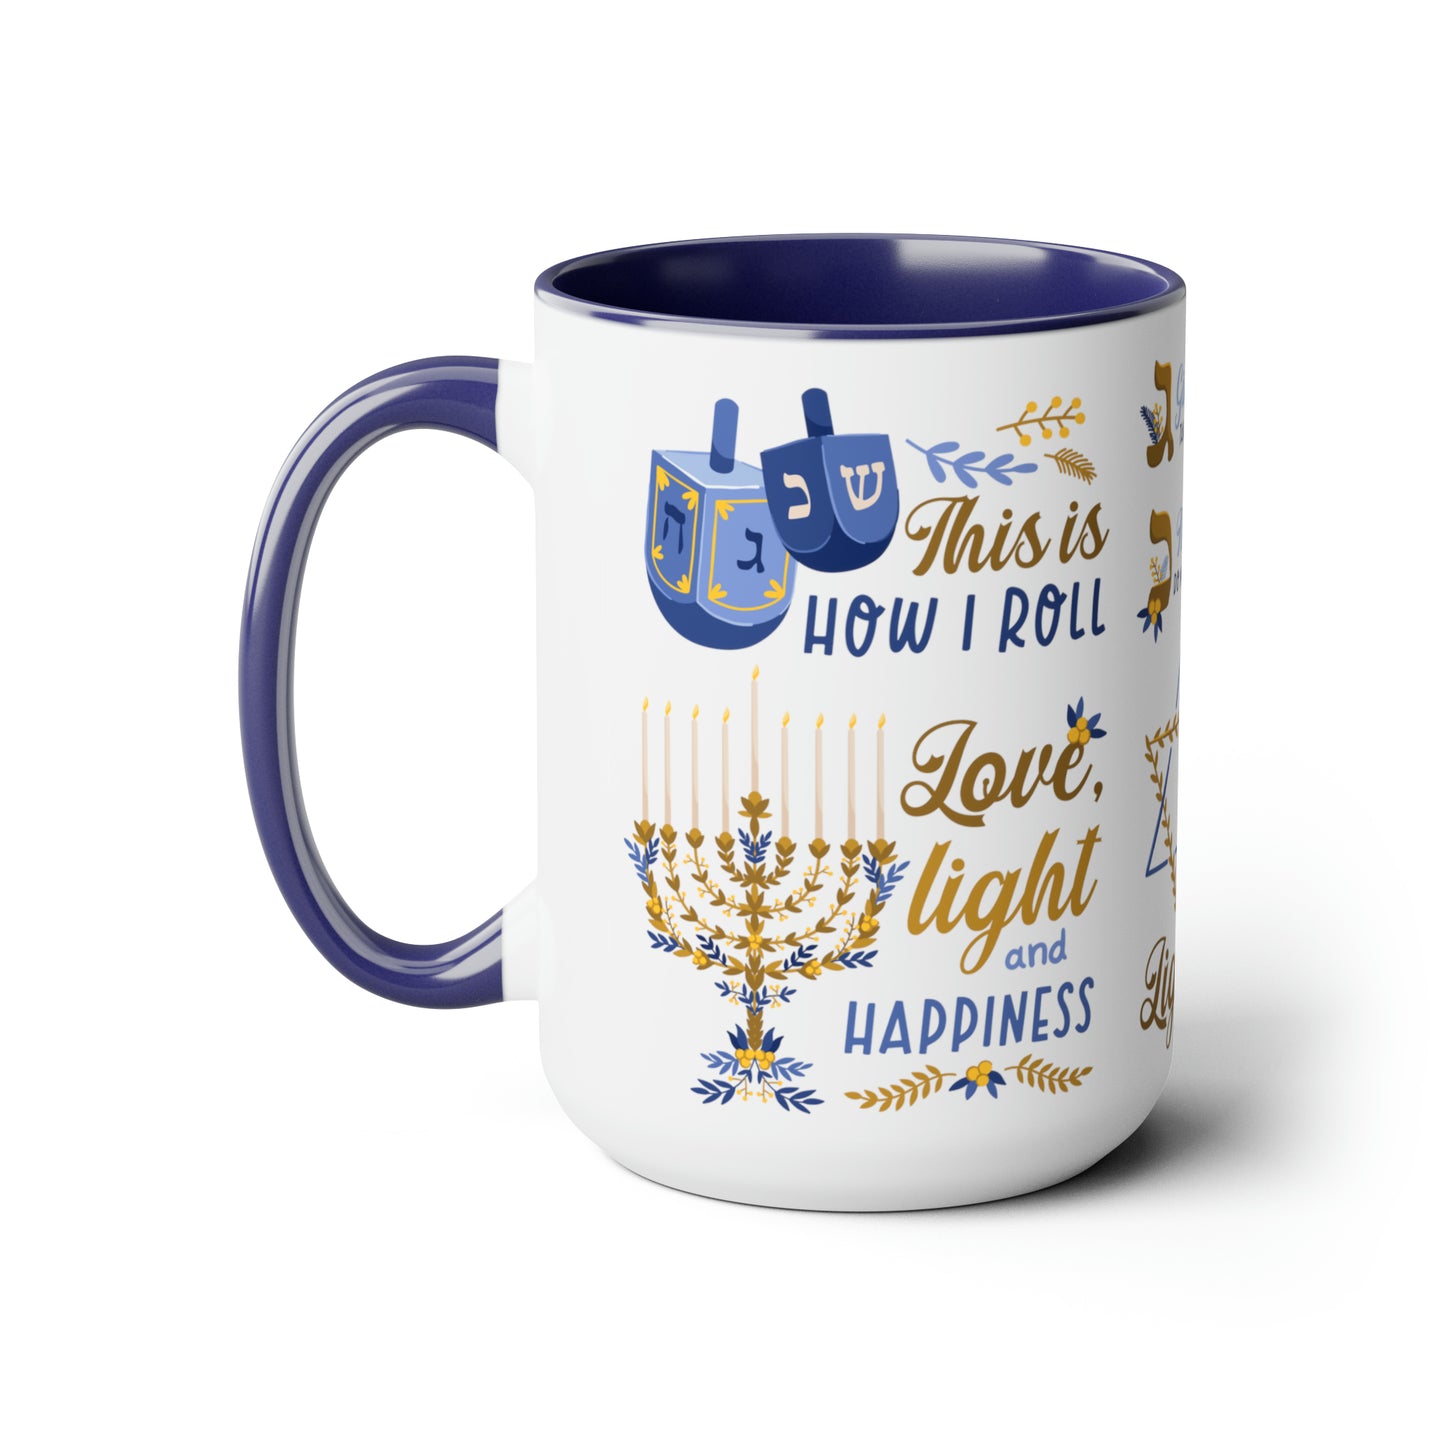 Hannukah Coffee Mugs, 15oz for holiday season. Ceramic coffee mug for Jewish. Hannukah gift for him or her.